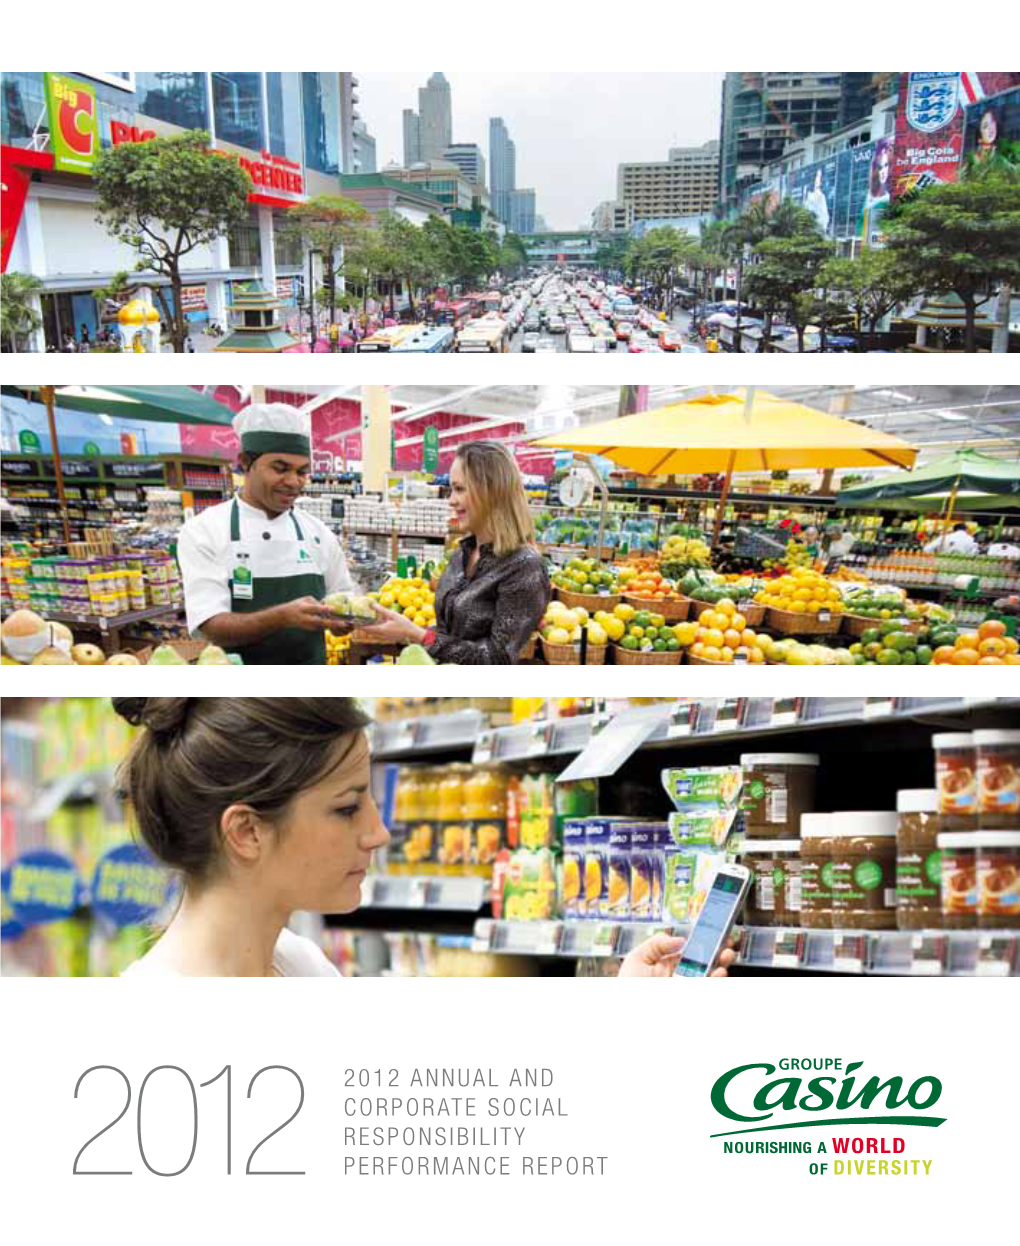 2012 Annual and Corporate Social Responsibility 2012 Performance Report Contents